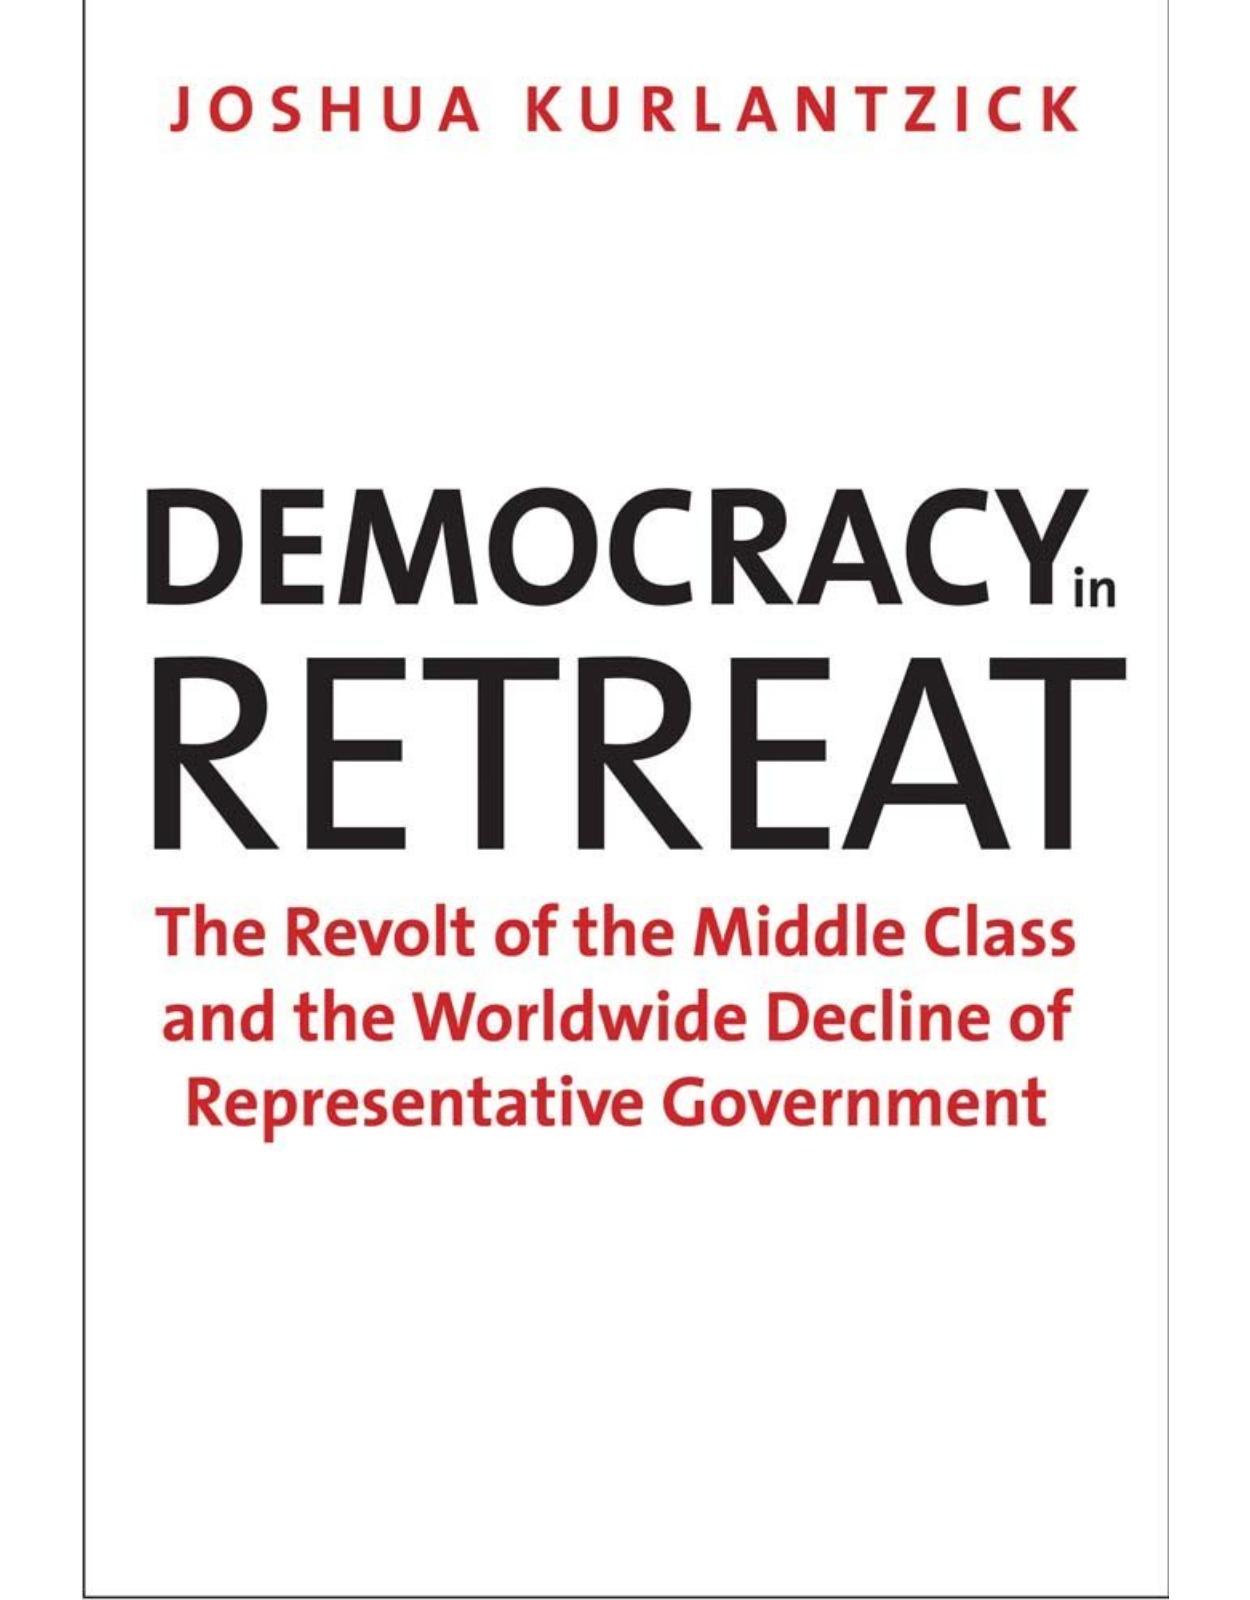 Democracy in Retreat. The Revolt of the Middle Class and the Worldwide Decline of Representative Government